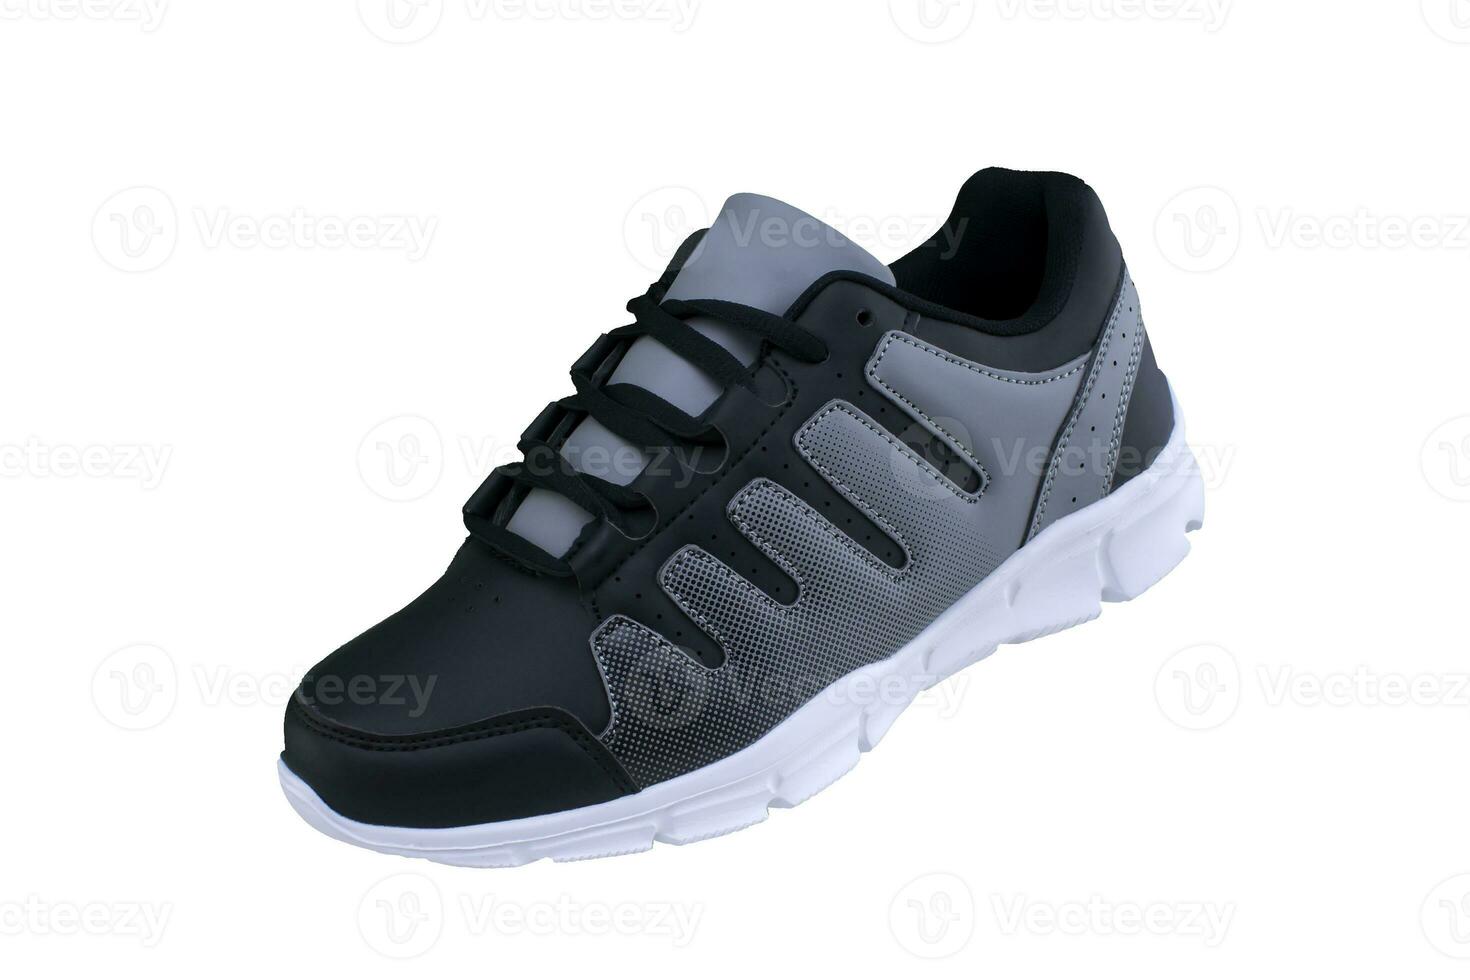 Sneakers black with gray accents on a white sole. Sport shoes on white background photo